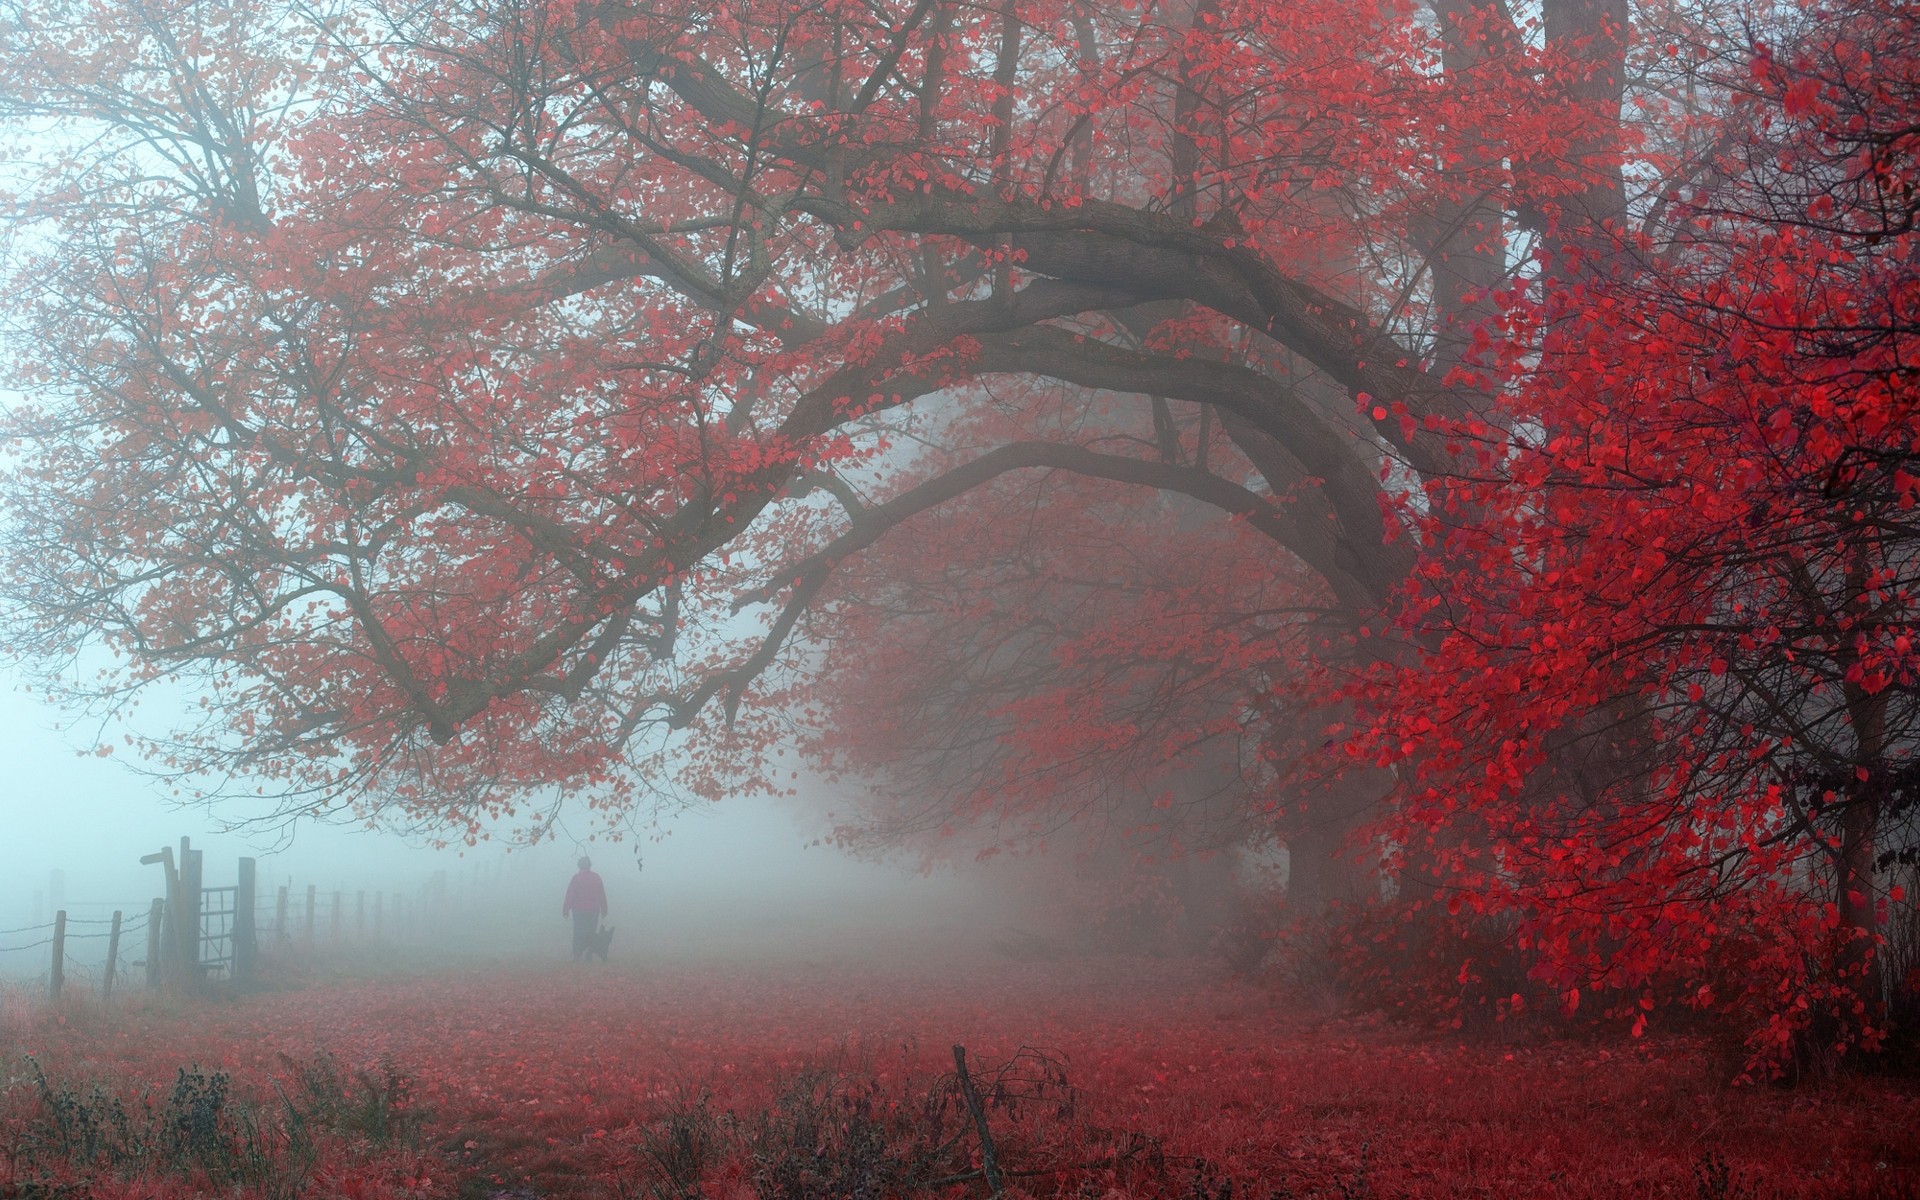 Nature Landscape Morning Red Leaves Trees Mist Fence UK Walking Atmosphere Fall 1920x1200